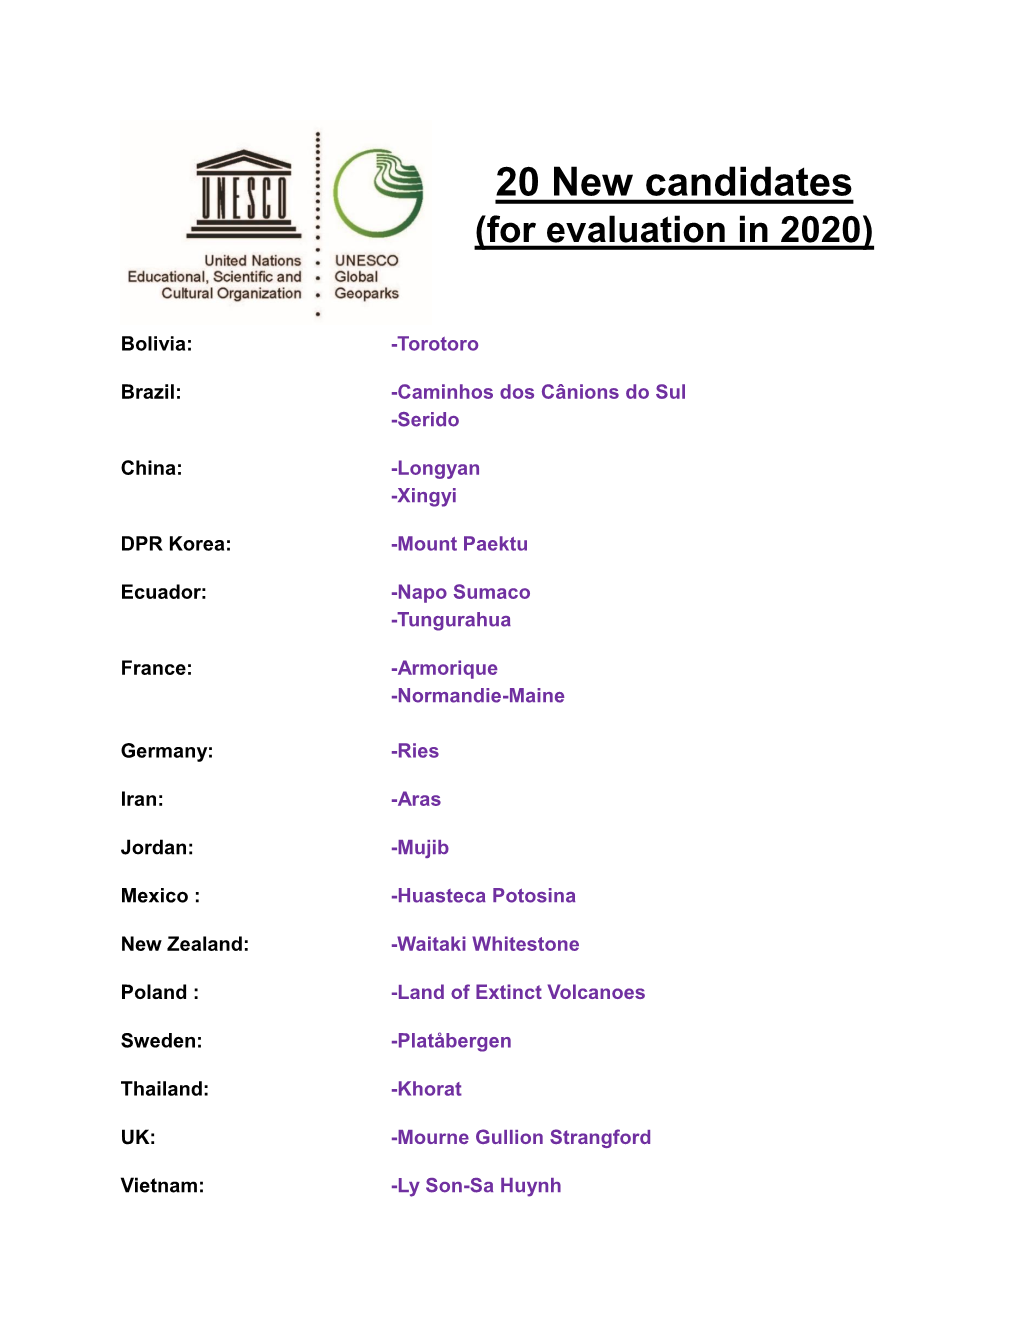 20 New Candidates (For Evaluation in 2020)